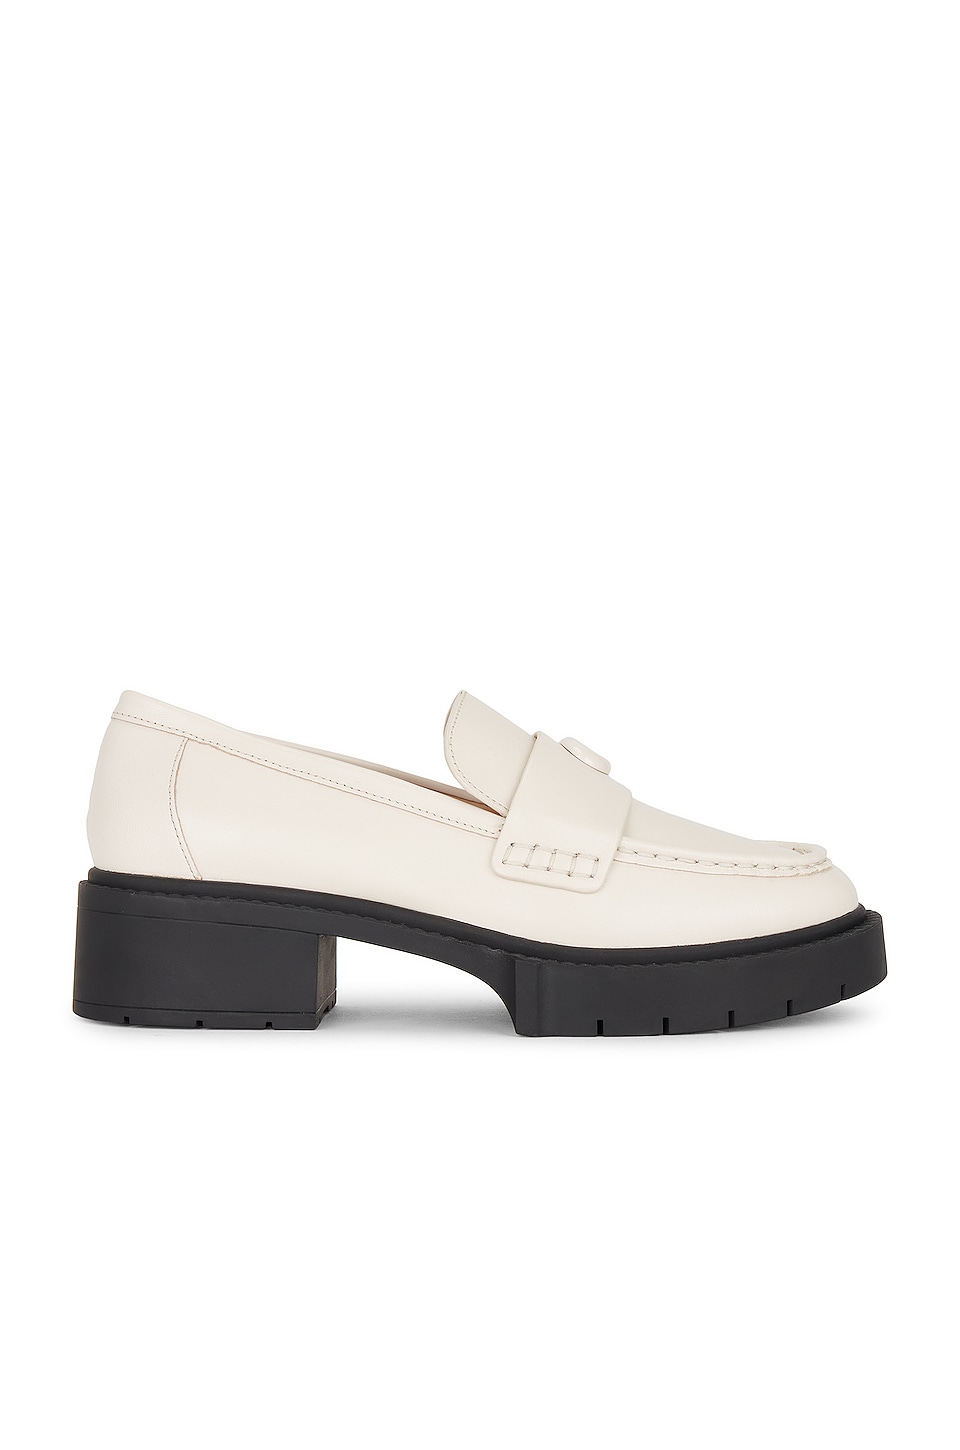 Coach Leah Loafer in Chalk | REVOLVE